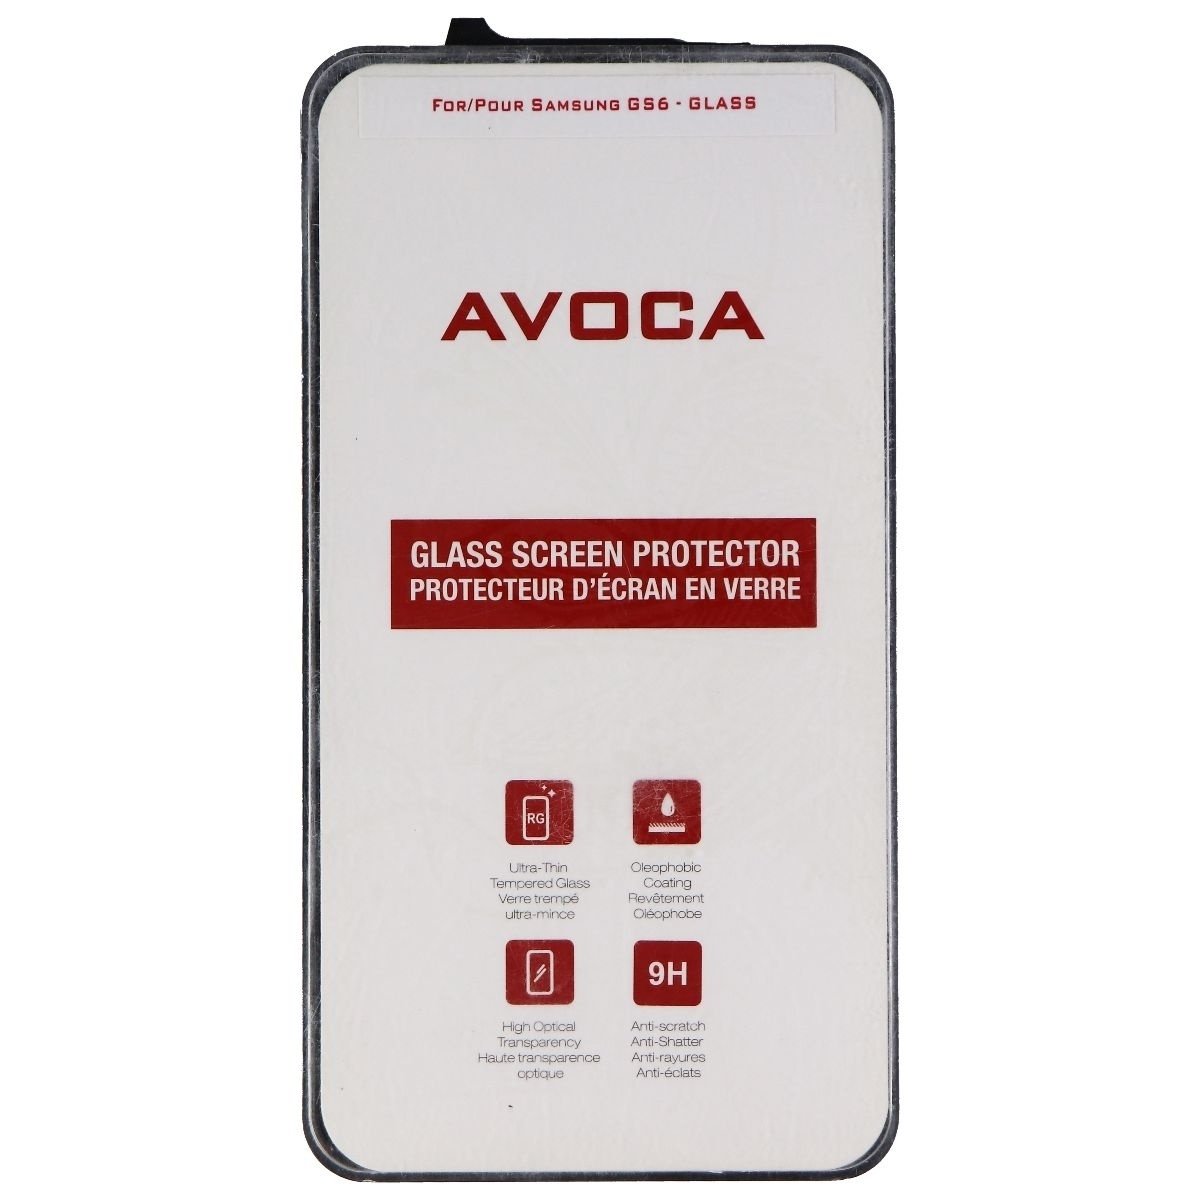 Avoca Glass Screen Protector For Samsung Galaxy S6 Smartphone - Clear